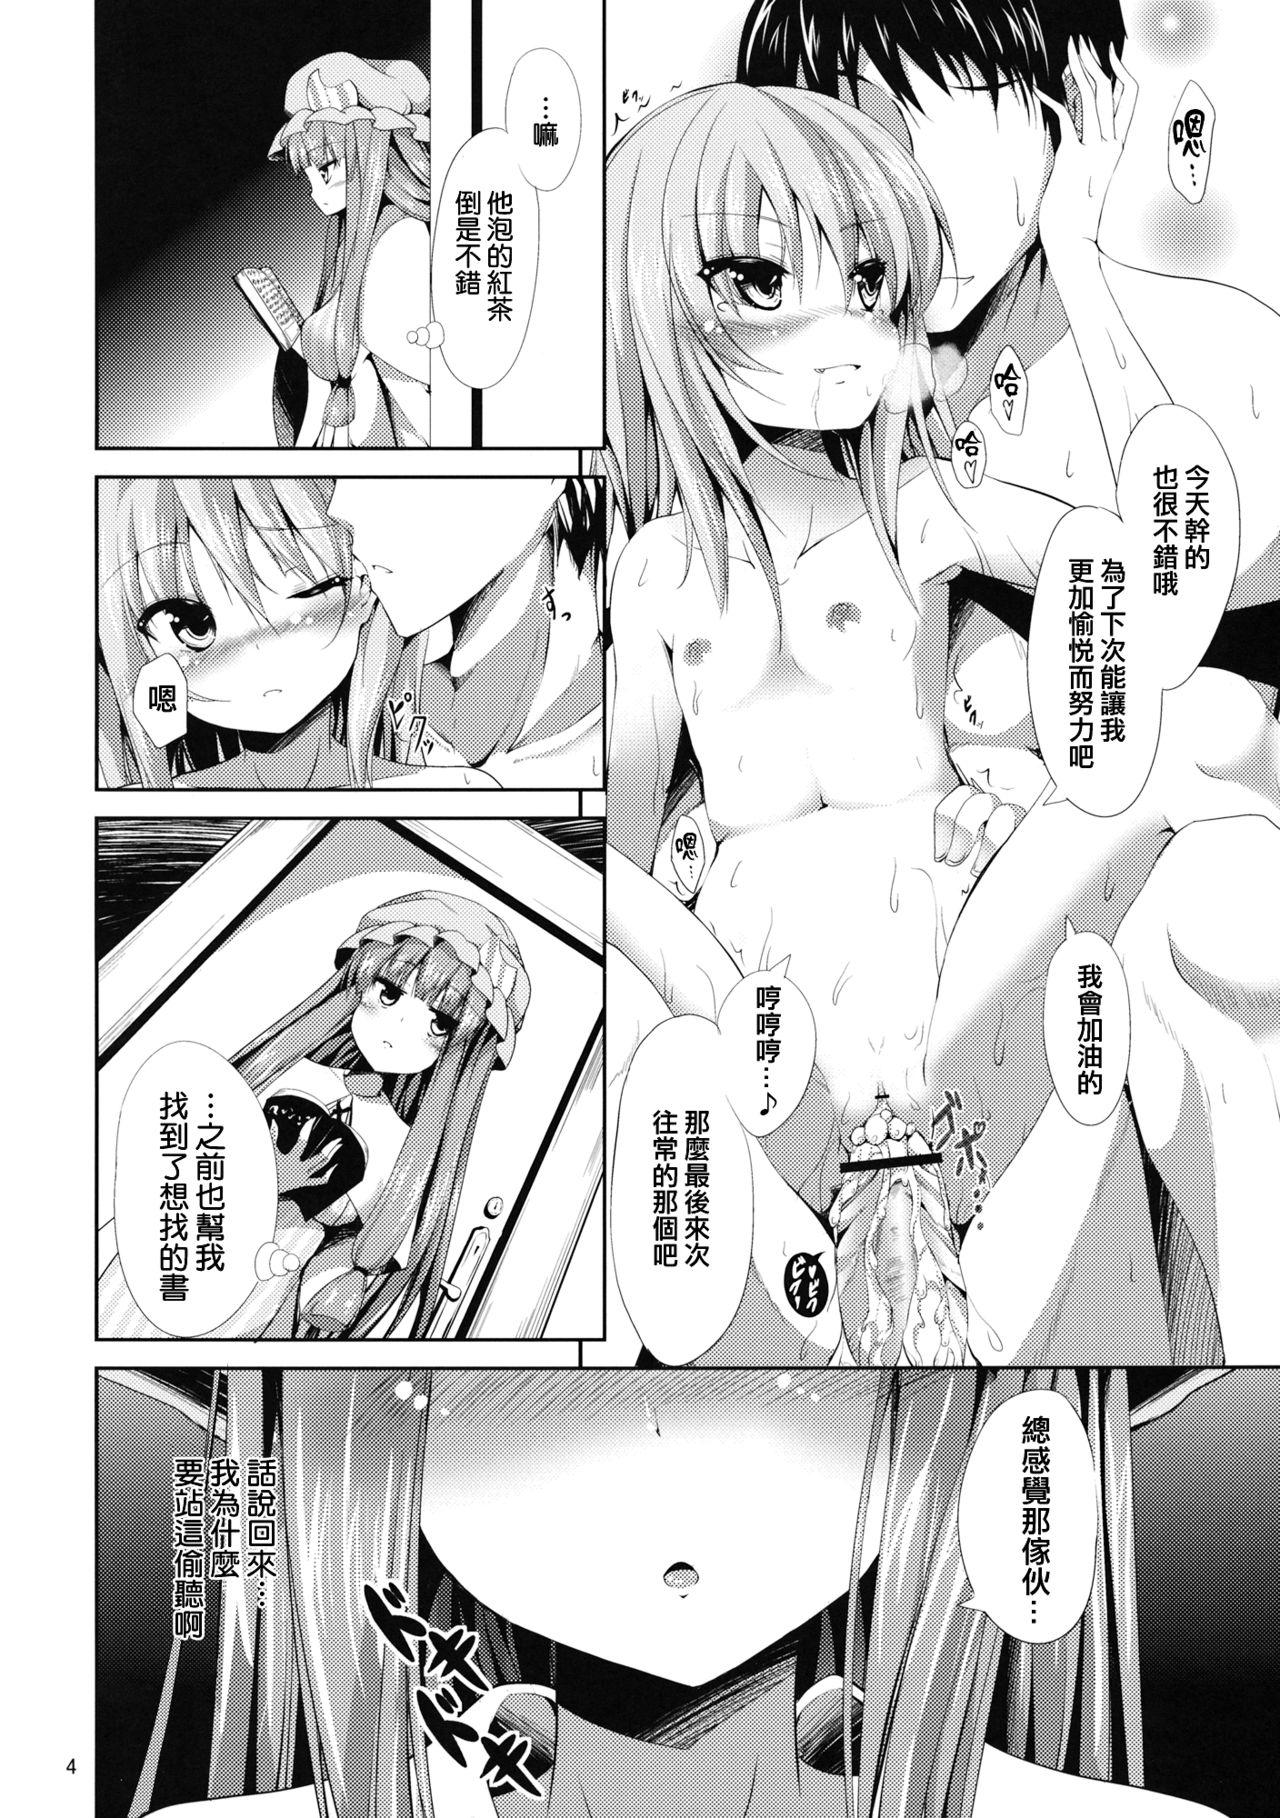 Celebrity Sex Sweet nothingS - Touhou project Nigeria - Page 4